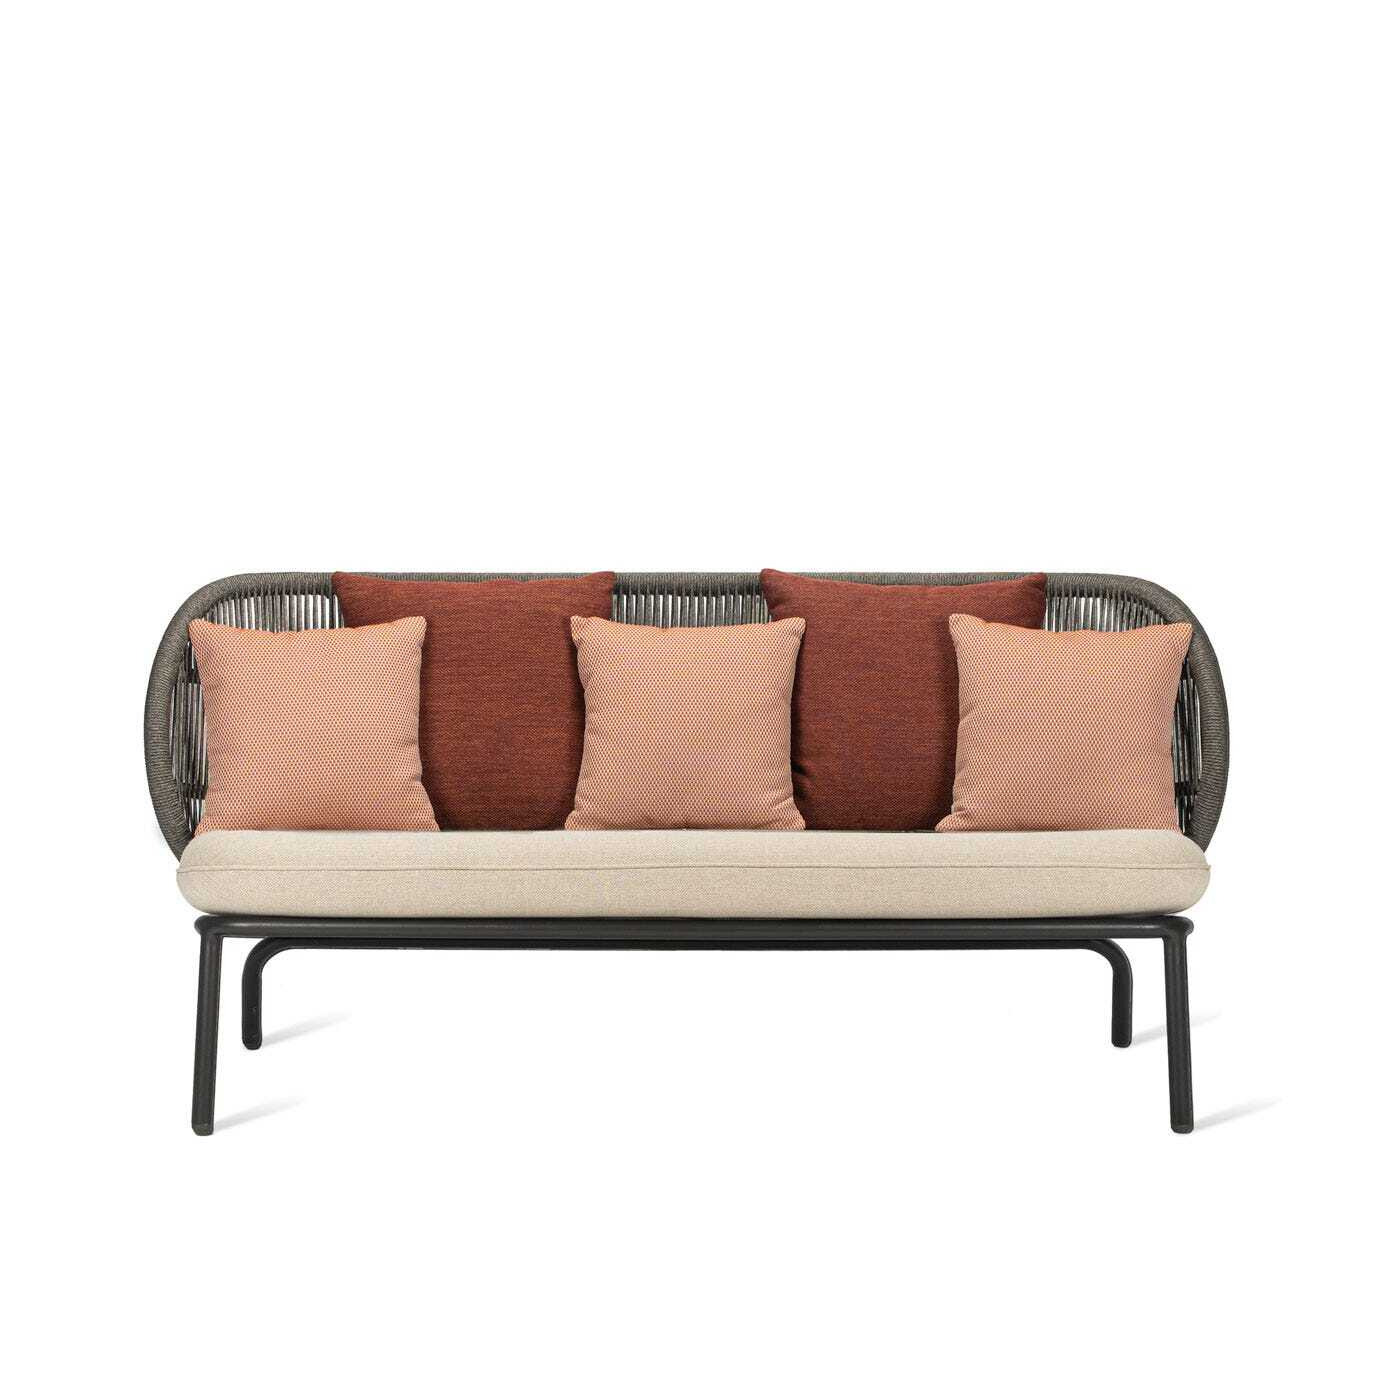 Vincent Sheppard Kodo Outdoor Lounge Sofa Almond Coral and Spice Scatter Cushions - image 1